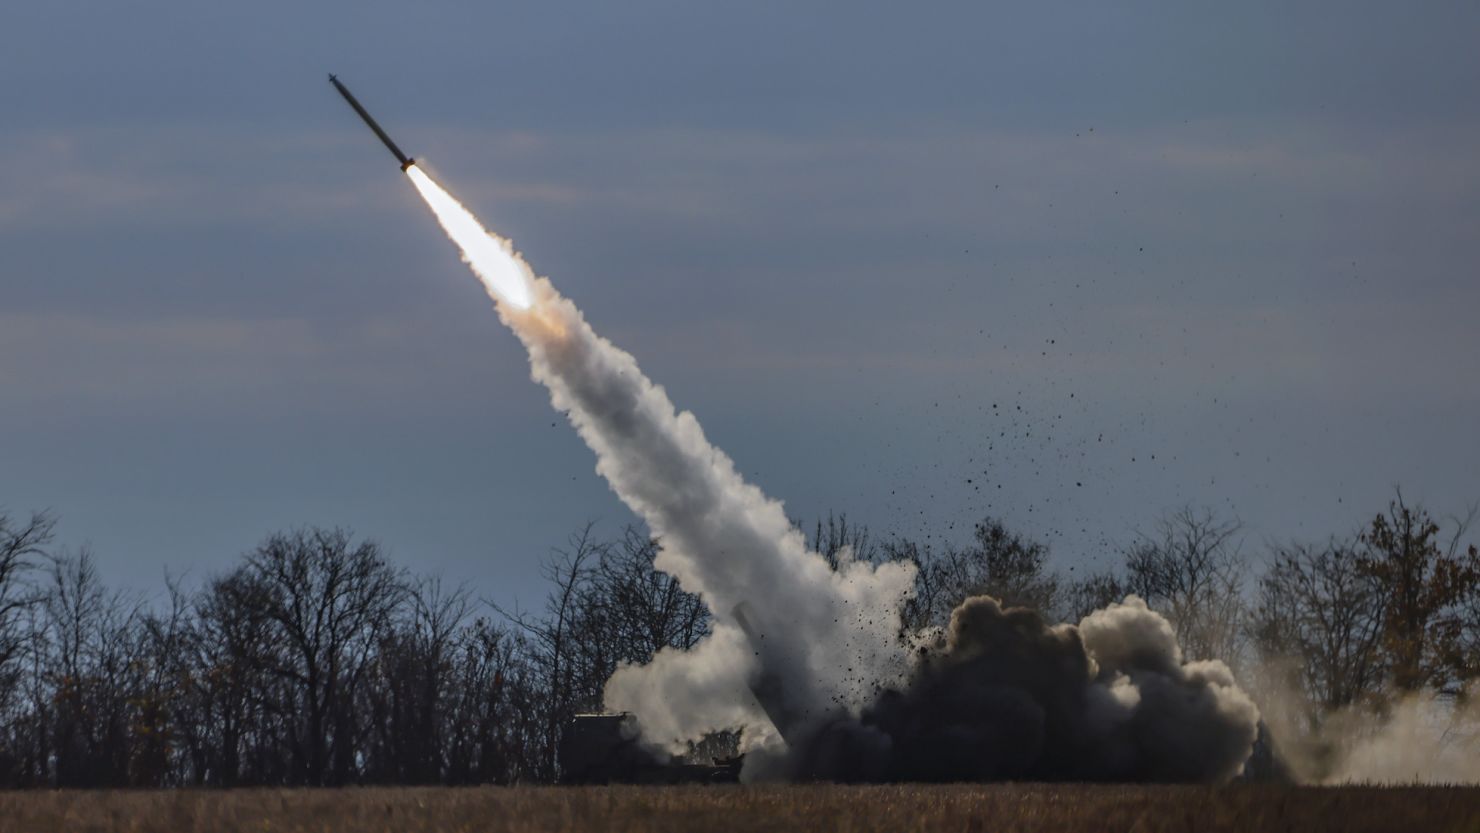 A High Mobility Artillery Rocket System (HIMARS) of the Ukrainian army is fired close to the front line in the northern Kherson region of Ukraine on November 5.